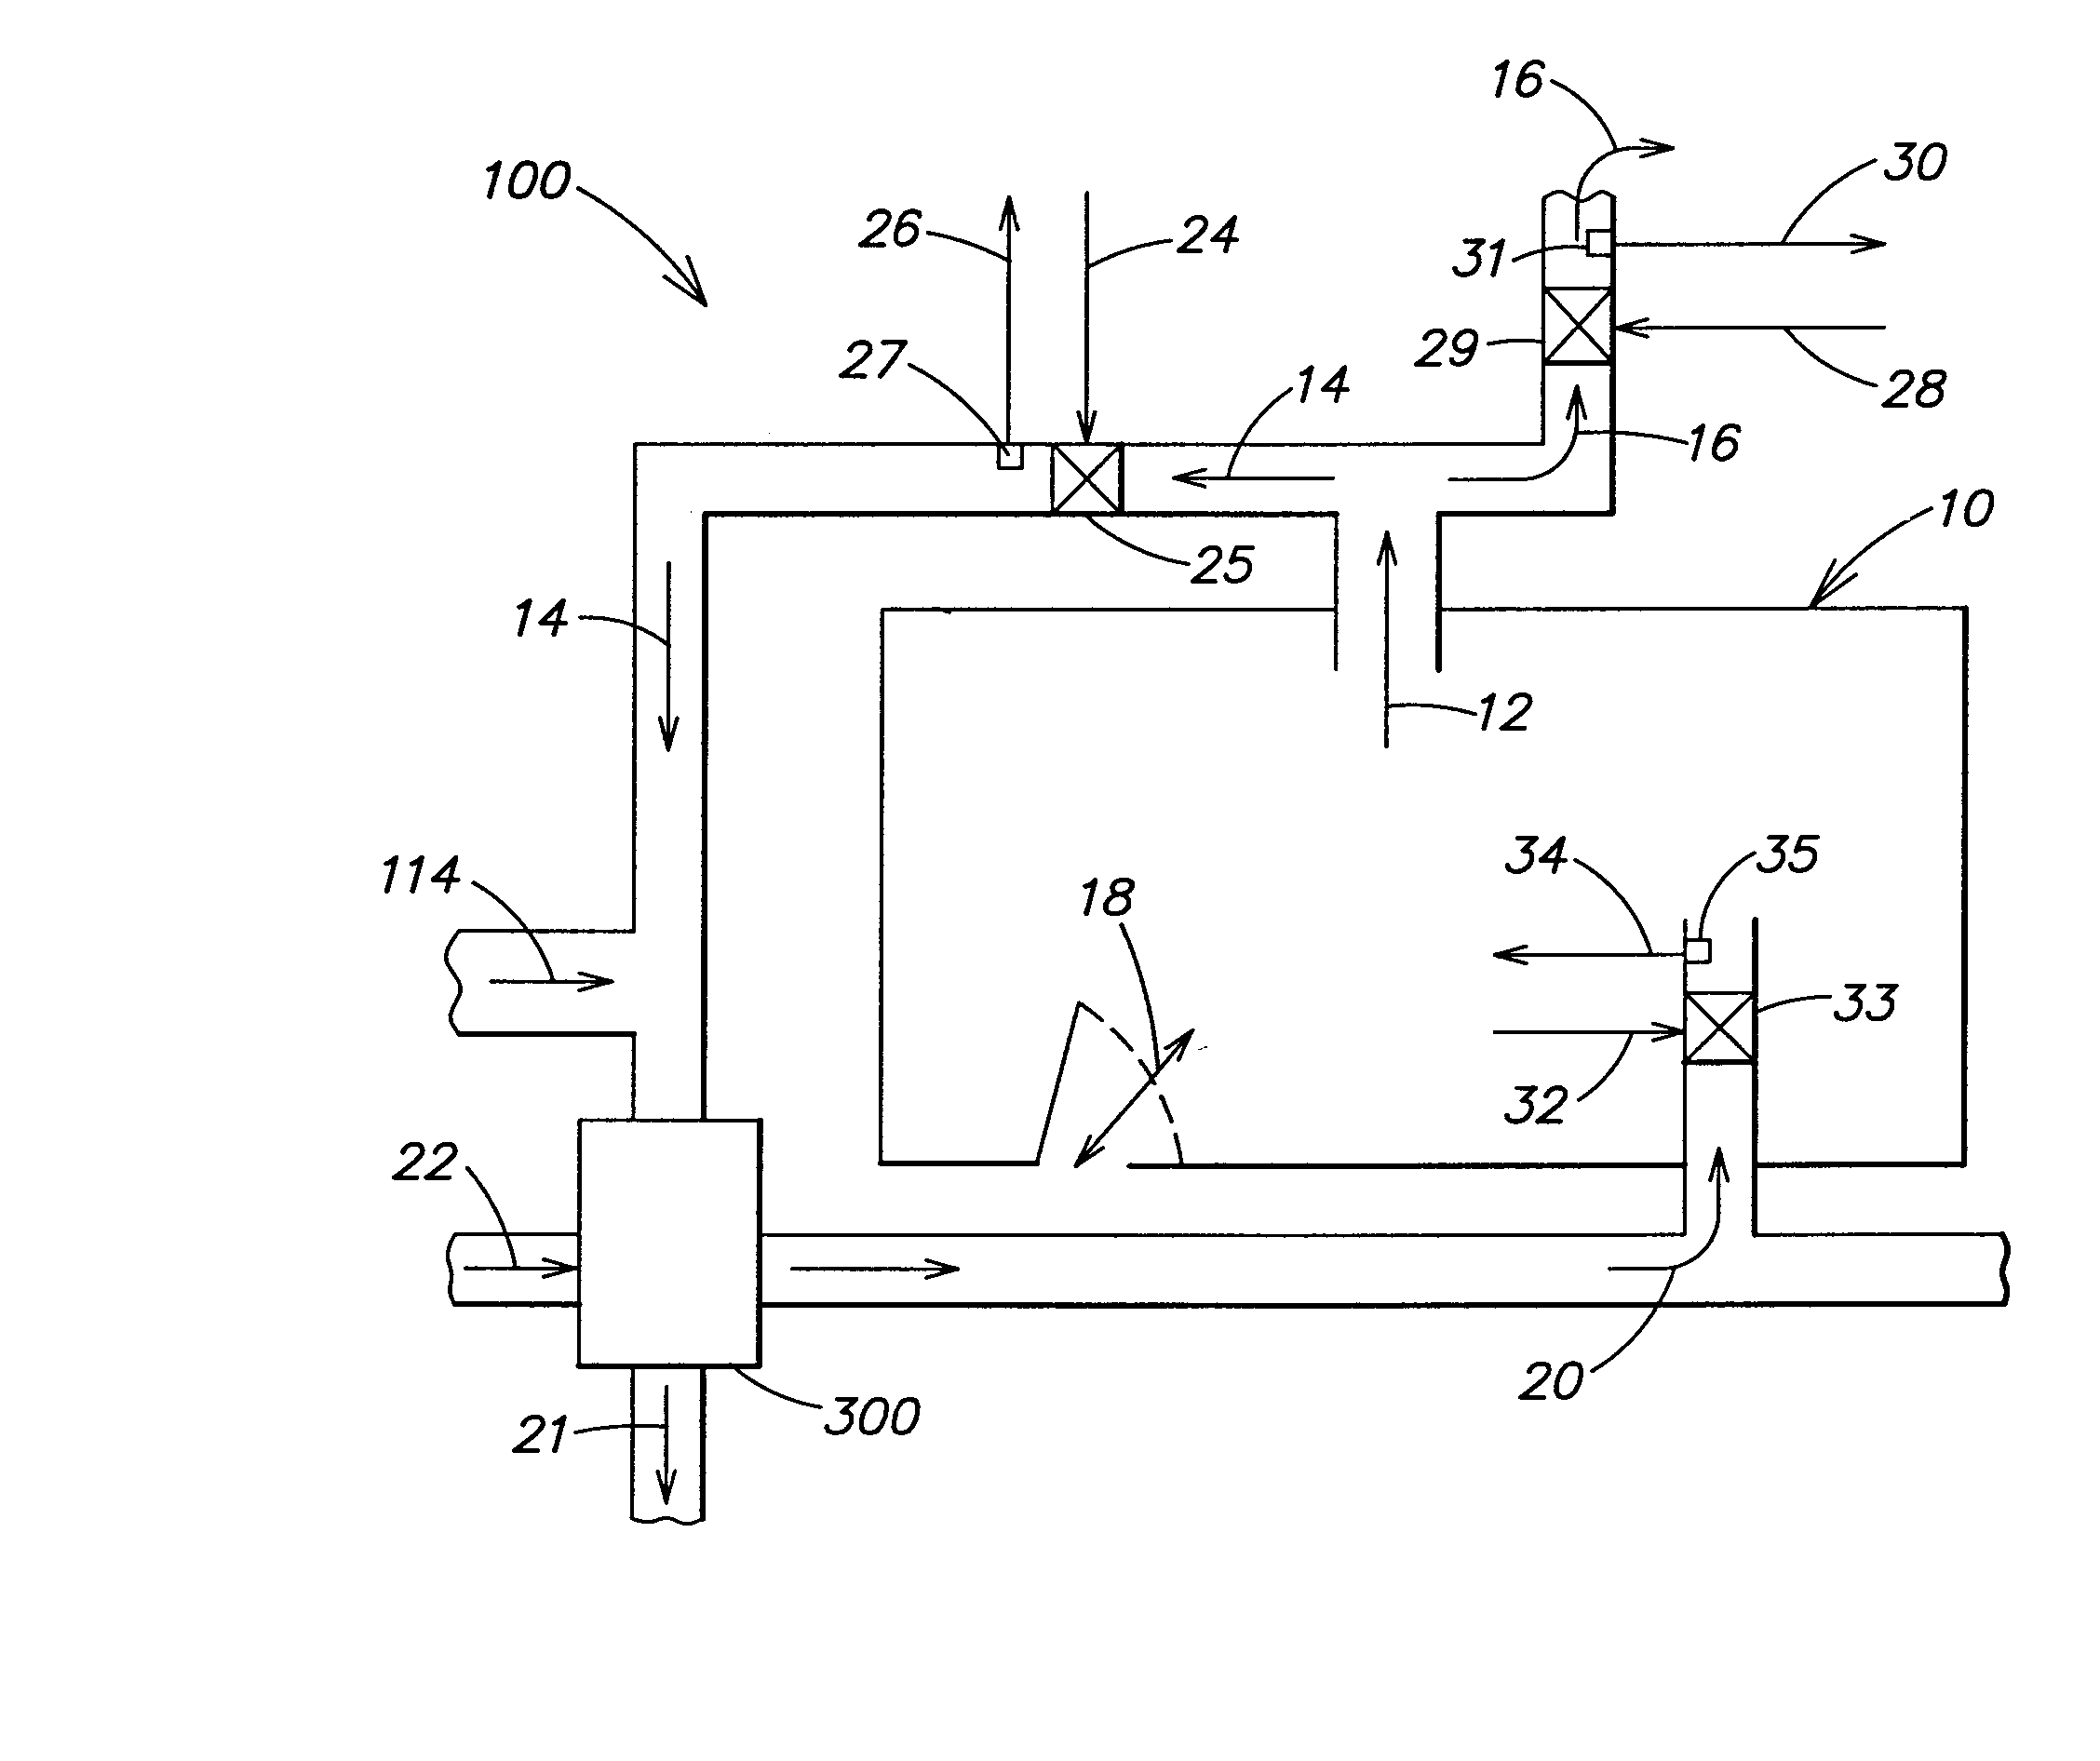 Methods and apparatus for recirculating air in a controlled ventilated environment